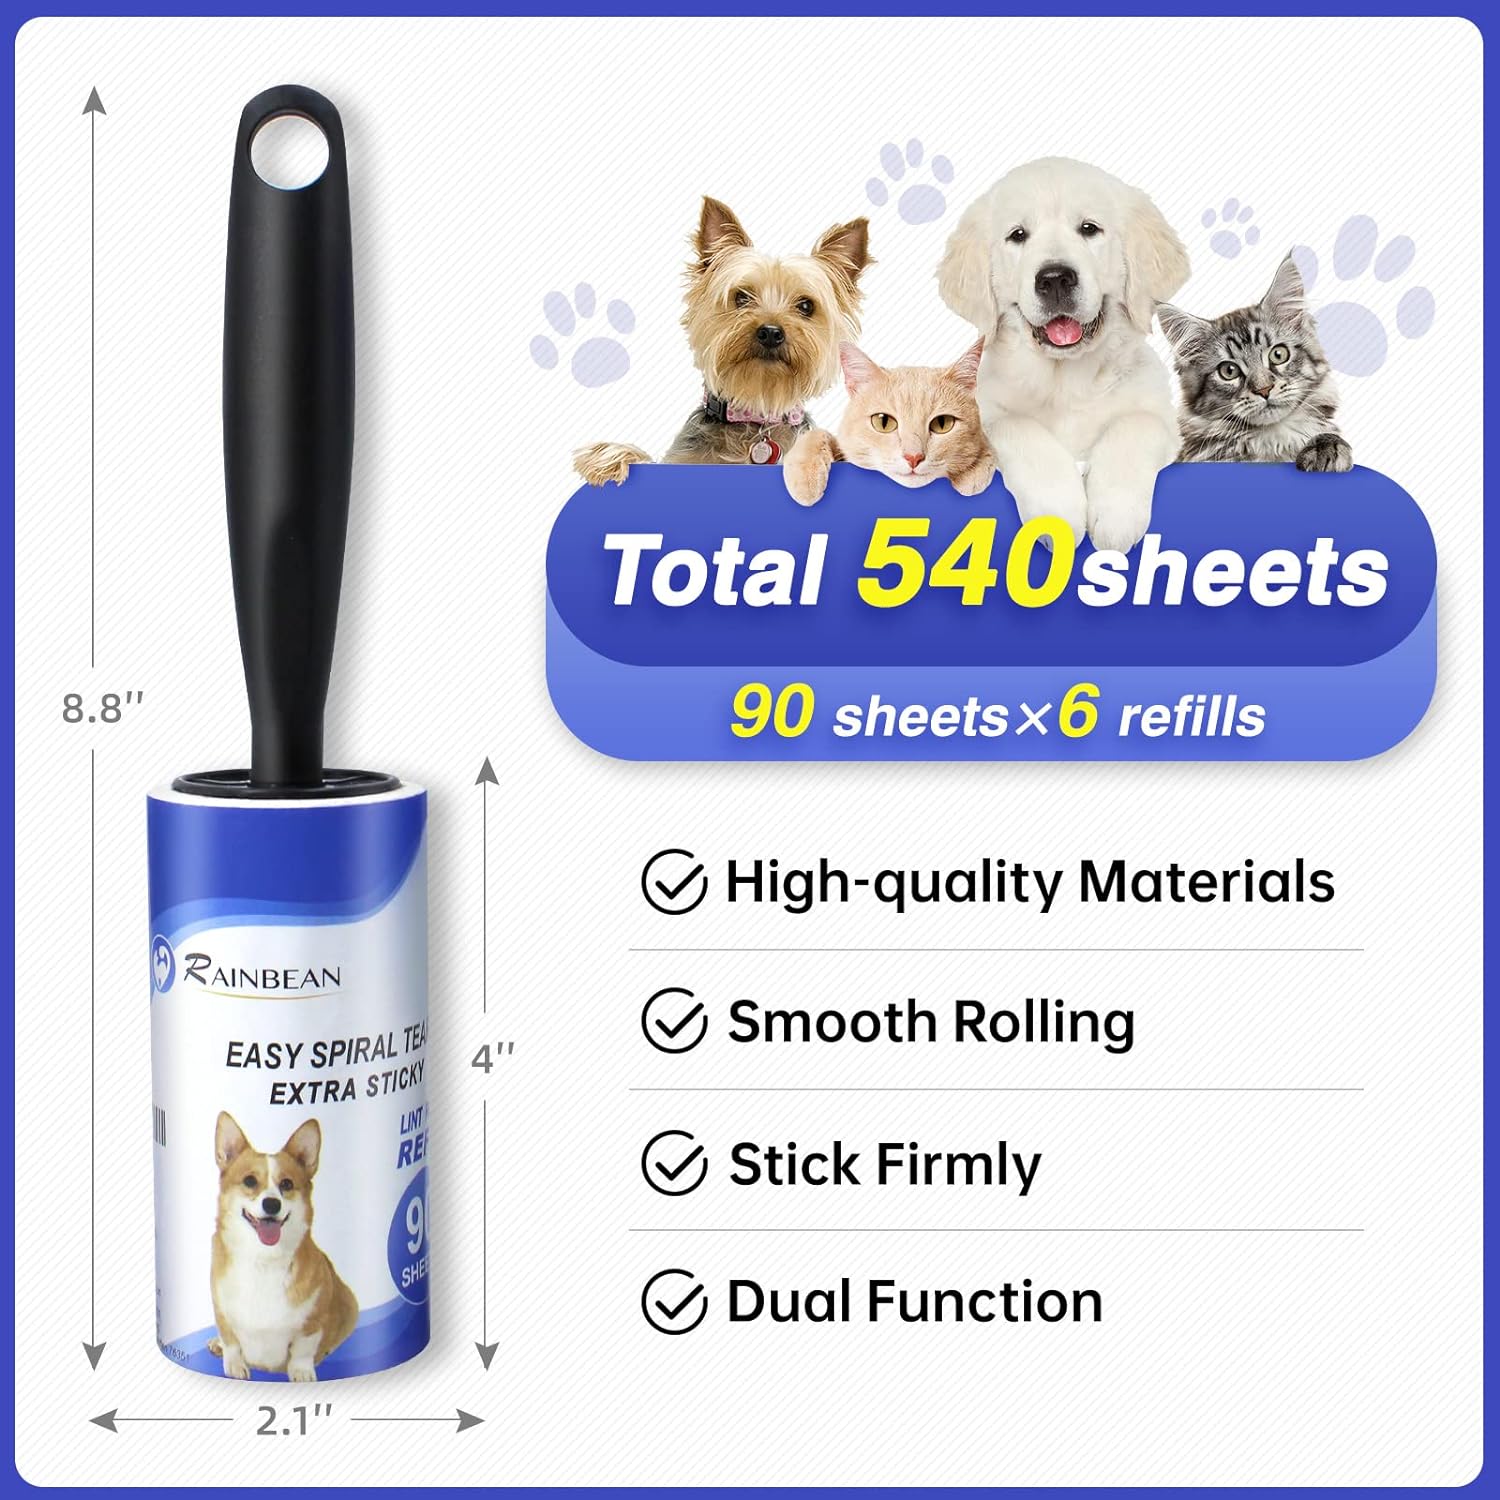 RAINBEAN Lint Rollers For Pet Hair Extra Sticky, 540 Sheets 6 Refills Lint Roller With 2 Upgrade Handles, Portable Lint Remover Brush Pet Hair Remover For Dog Cat Hair Removal, Clothes, Furniture 1